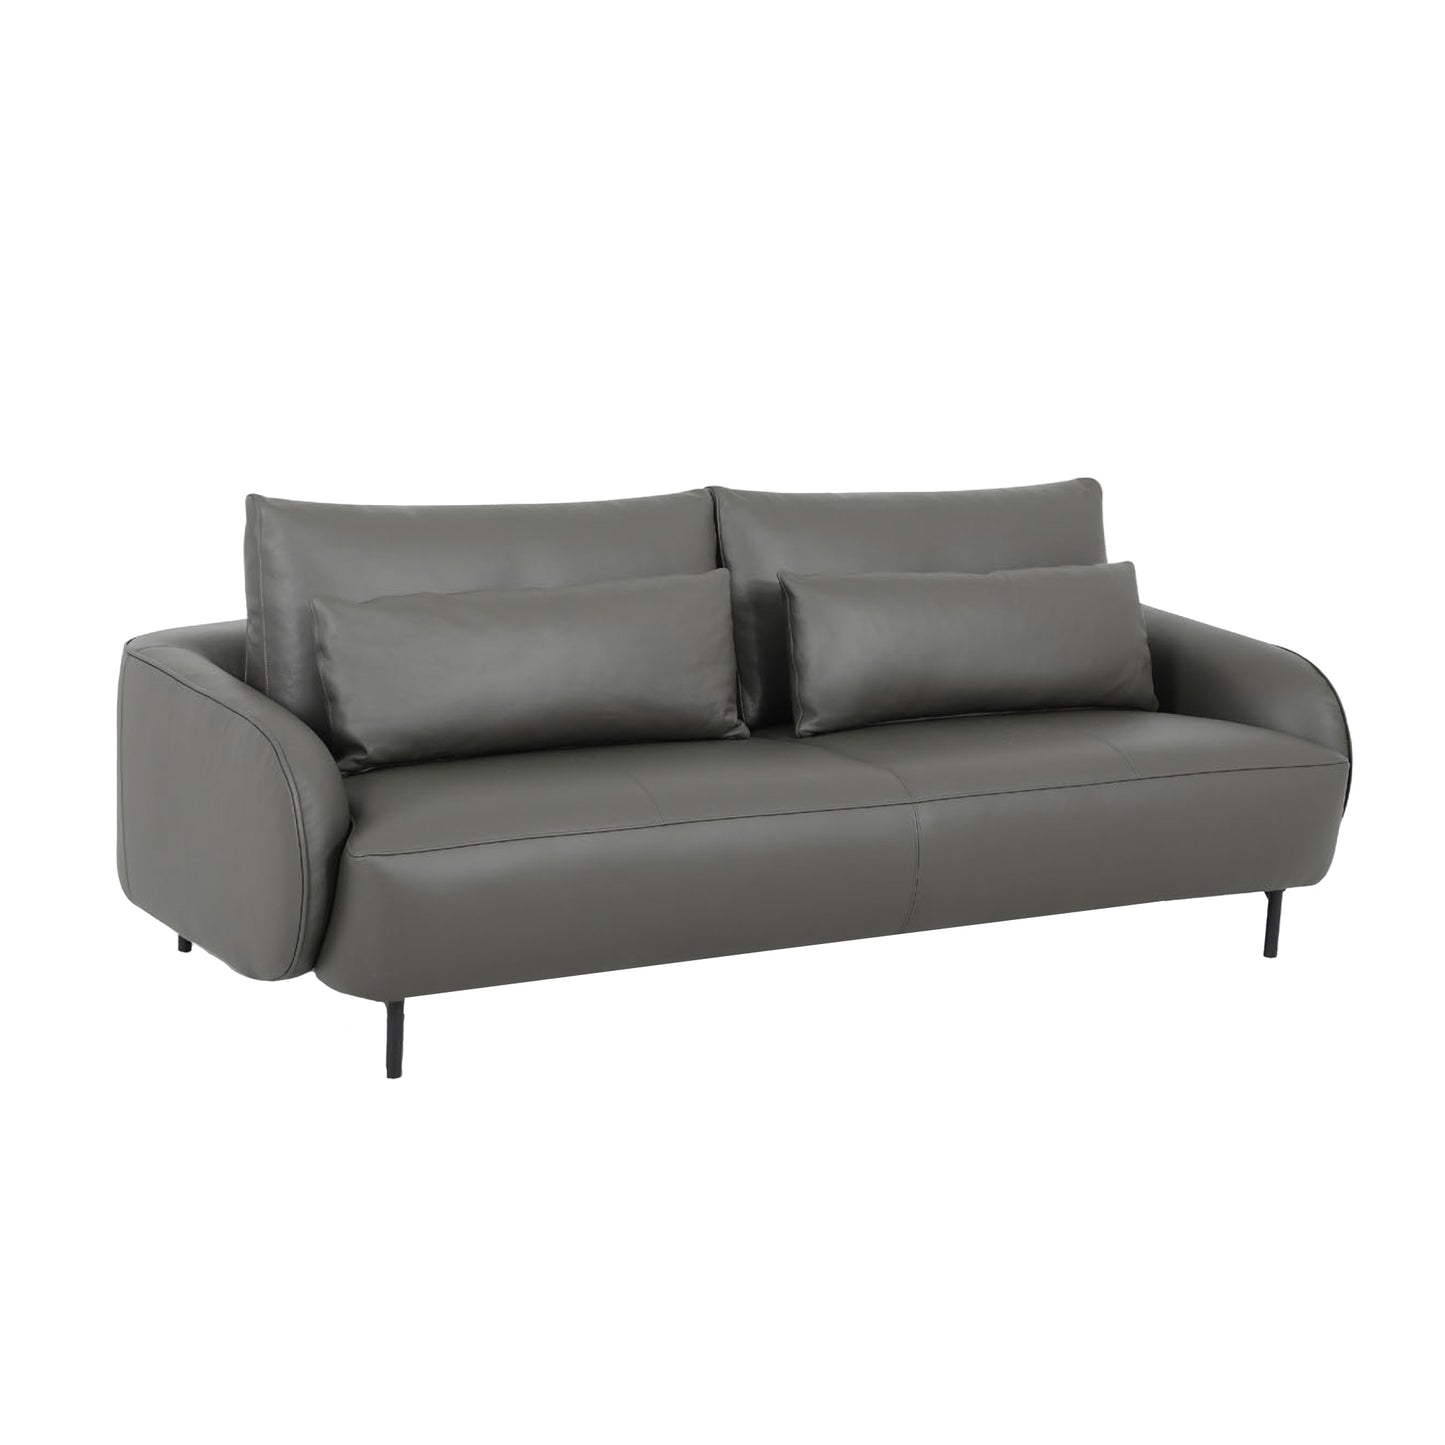 Ready Stock: Bella 2.5 Seater Lift-up Backrest Sofa in Dark Green Leather